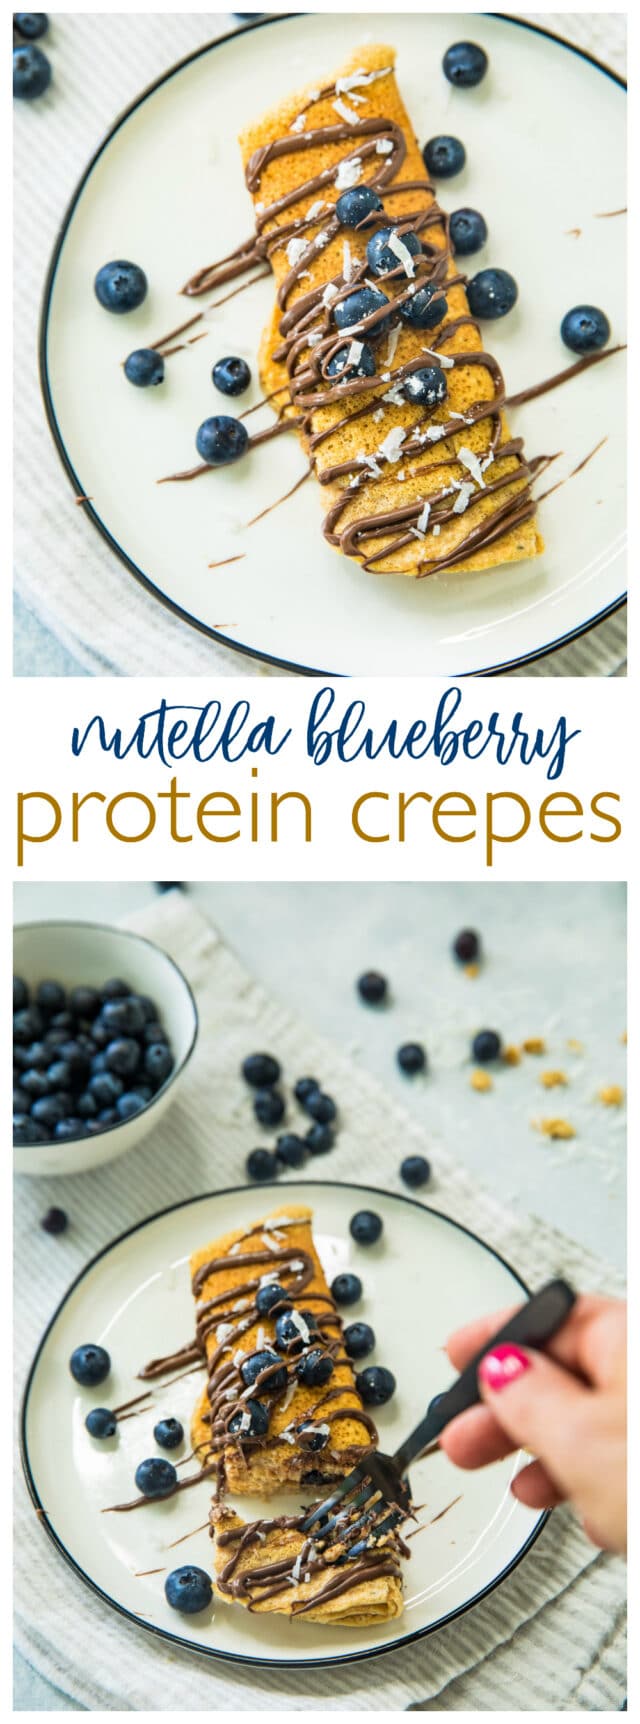 Pinterest image of Nutella Blueberry Protein Crepes